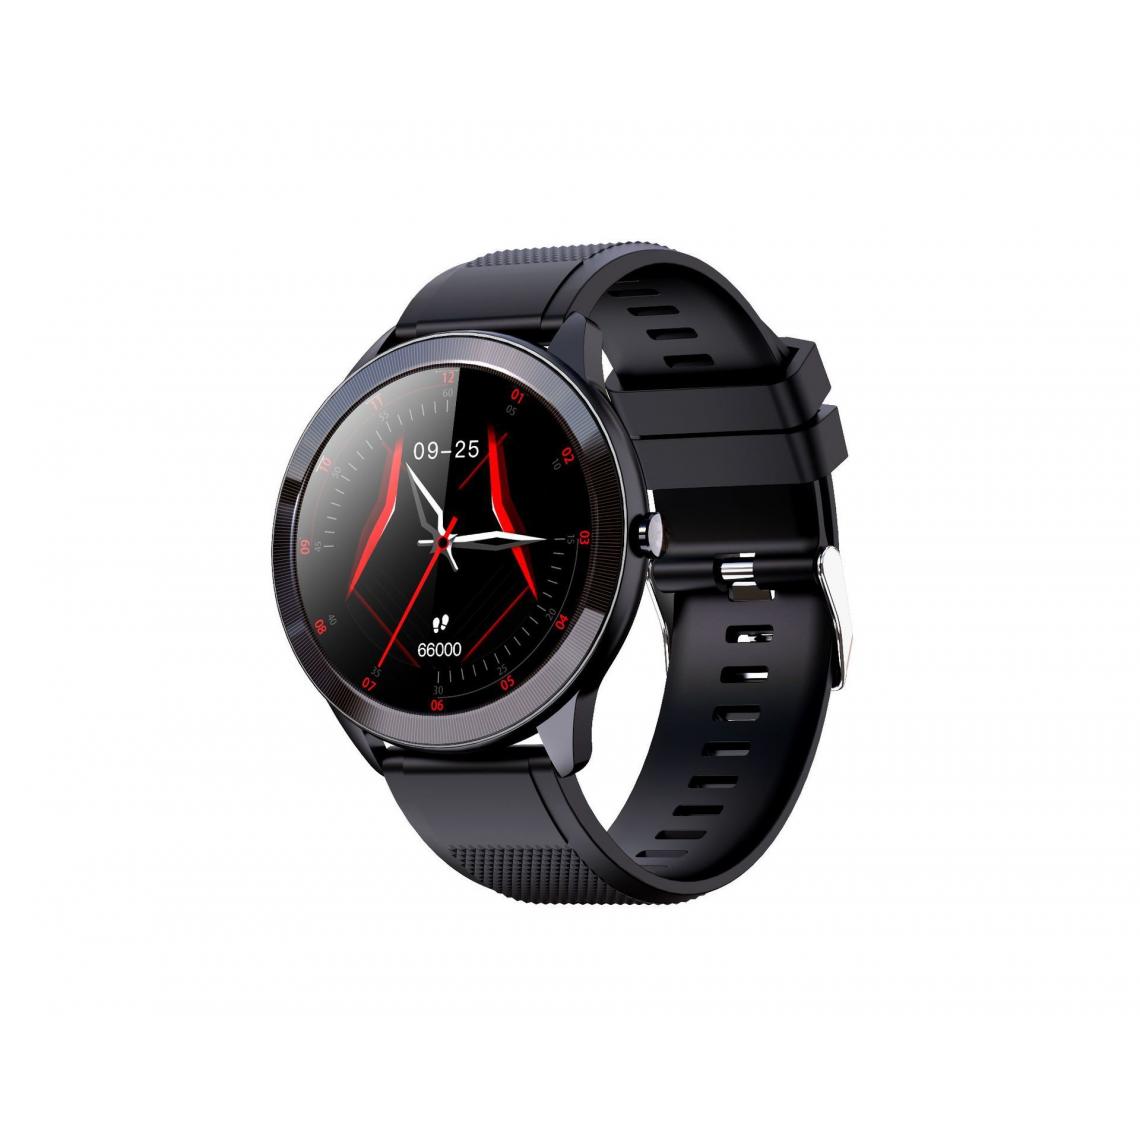 Chronotech Montres - Chronus SN93 Smart Watch Men Women IP68 Waterproof Heart Rate Monitor Fitness Tracker Bluetooth Smartwatch for Android IOS(black) - Montre connectée